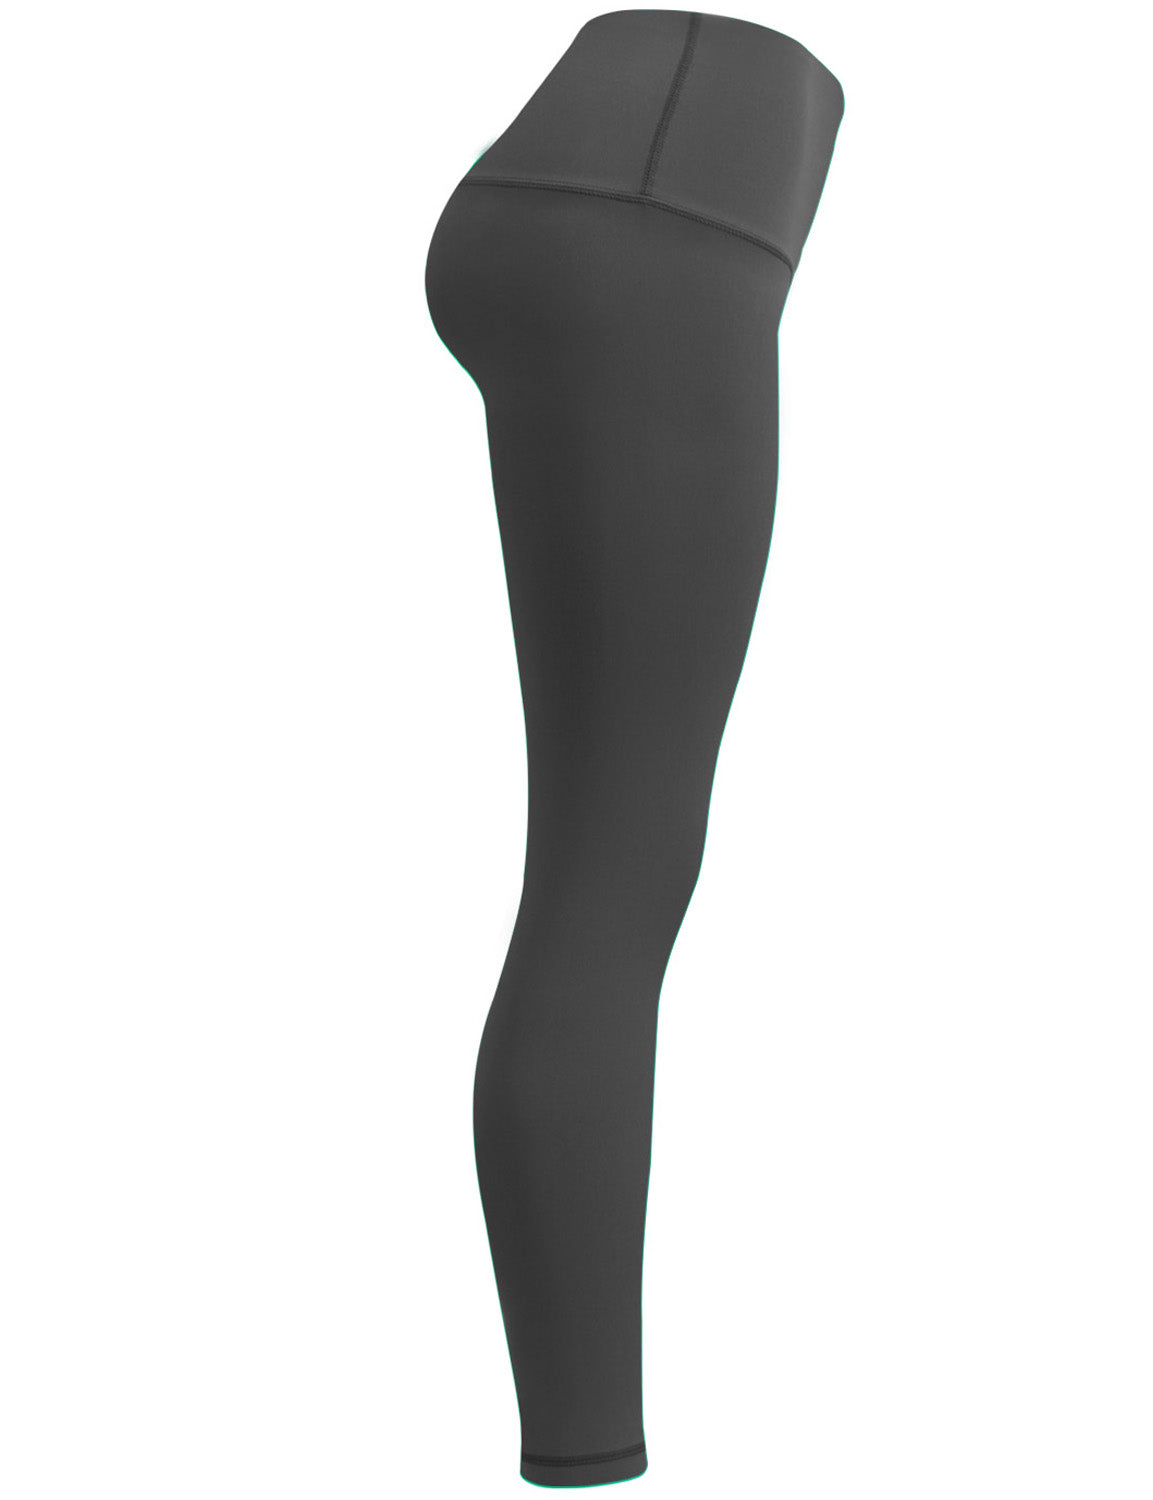 High Waist Yoga Pants shadowcharcoal 75%Nylon/25%Spandex Fabric doesn't attract lint easily 4-way stretch No see-through Moisture-wicking Tummy control Inner pocket Four lengths